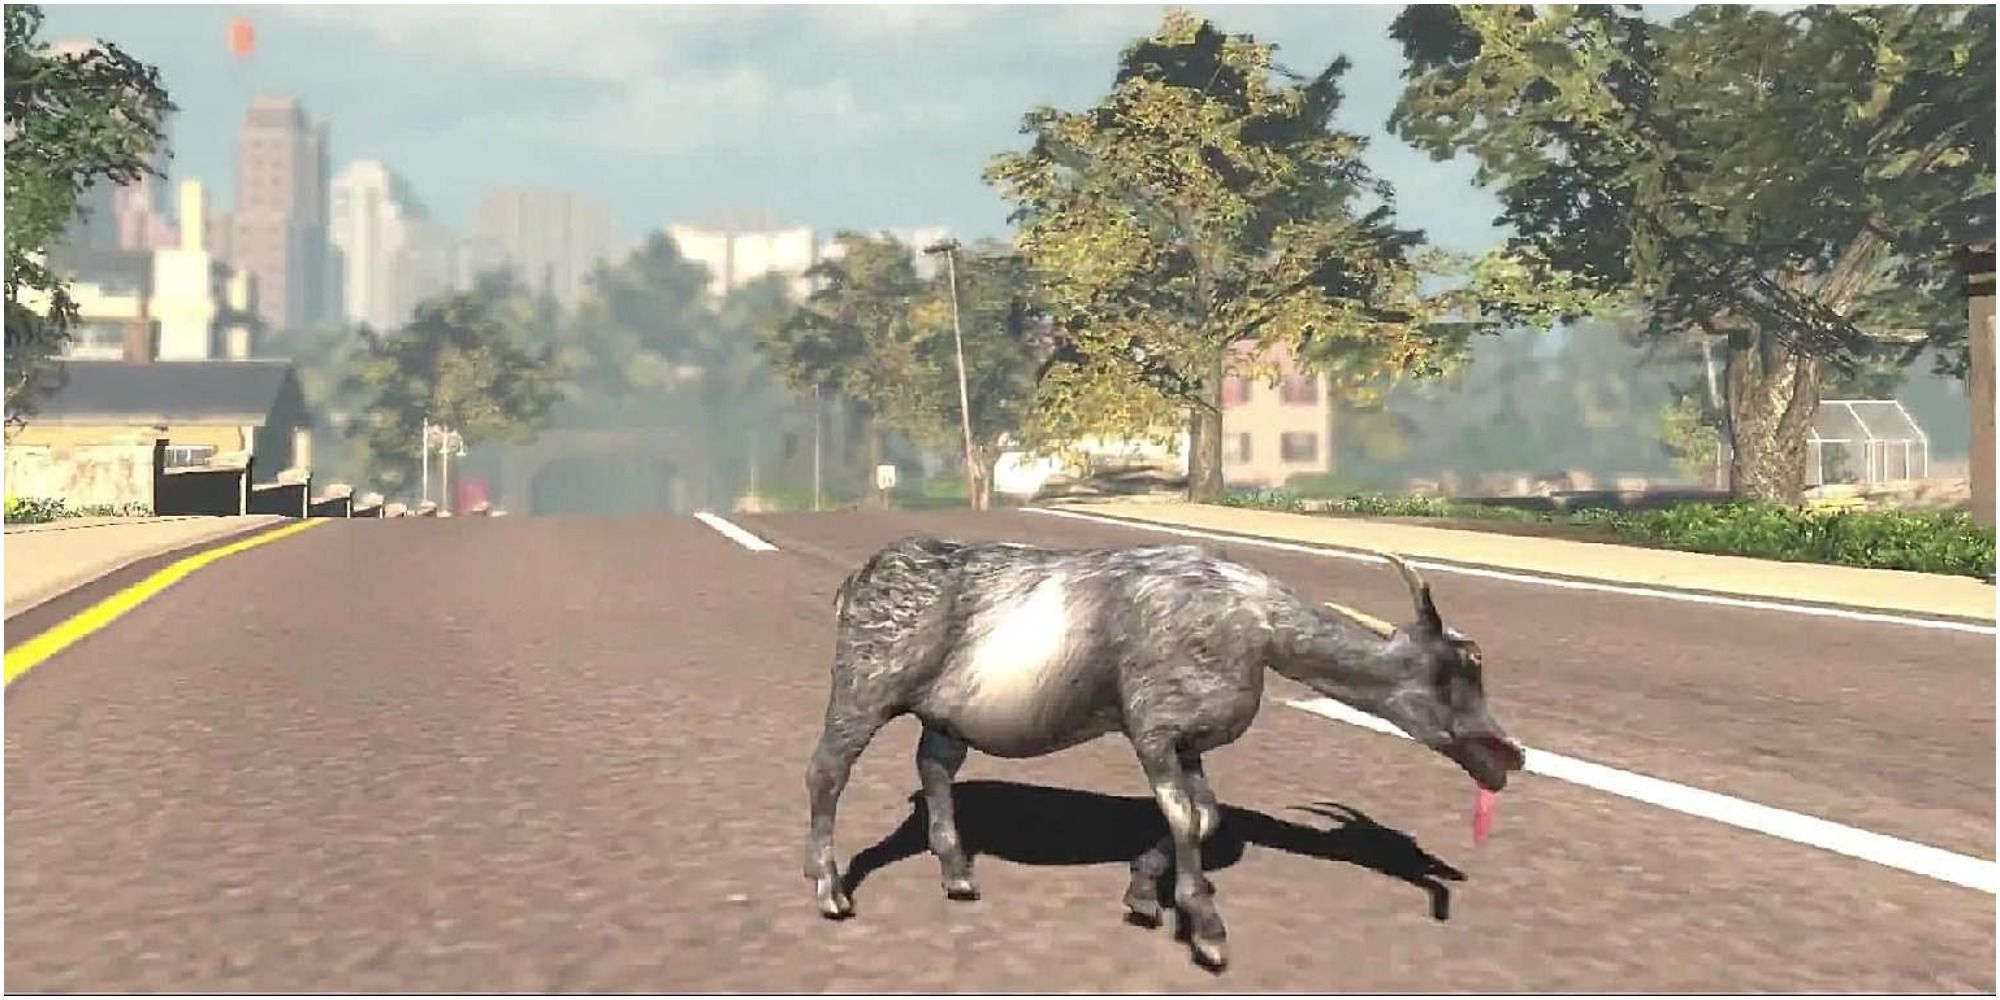 The goat in Goat Simulator stands in the middle of an empty street